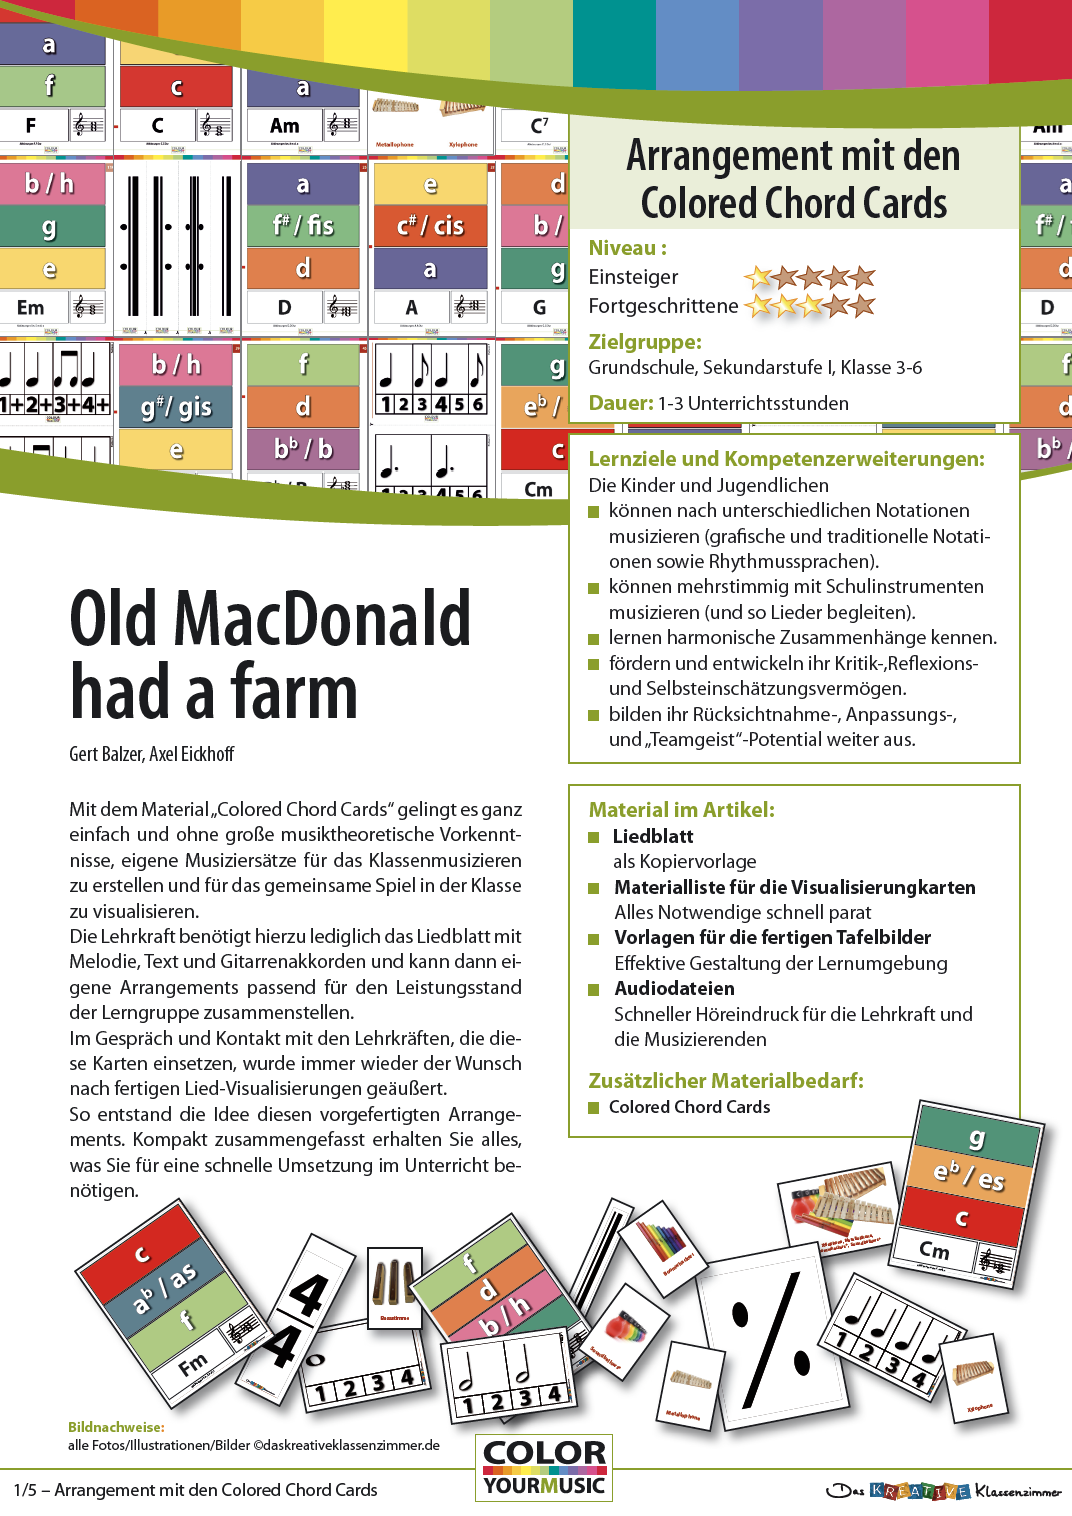 Old MacDonald - Colored Chord Cards